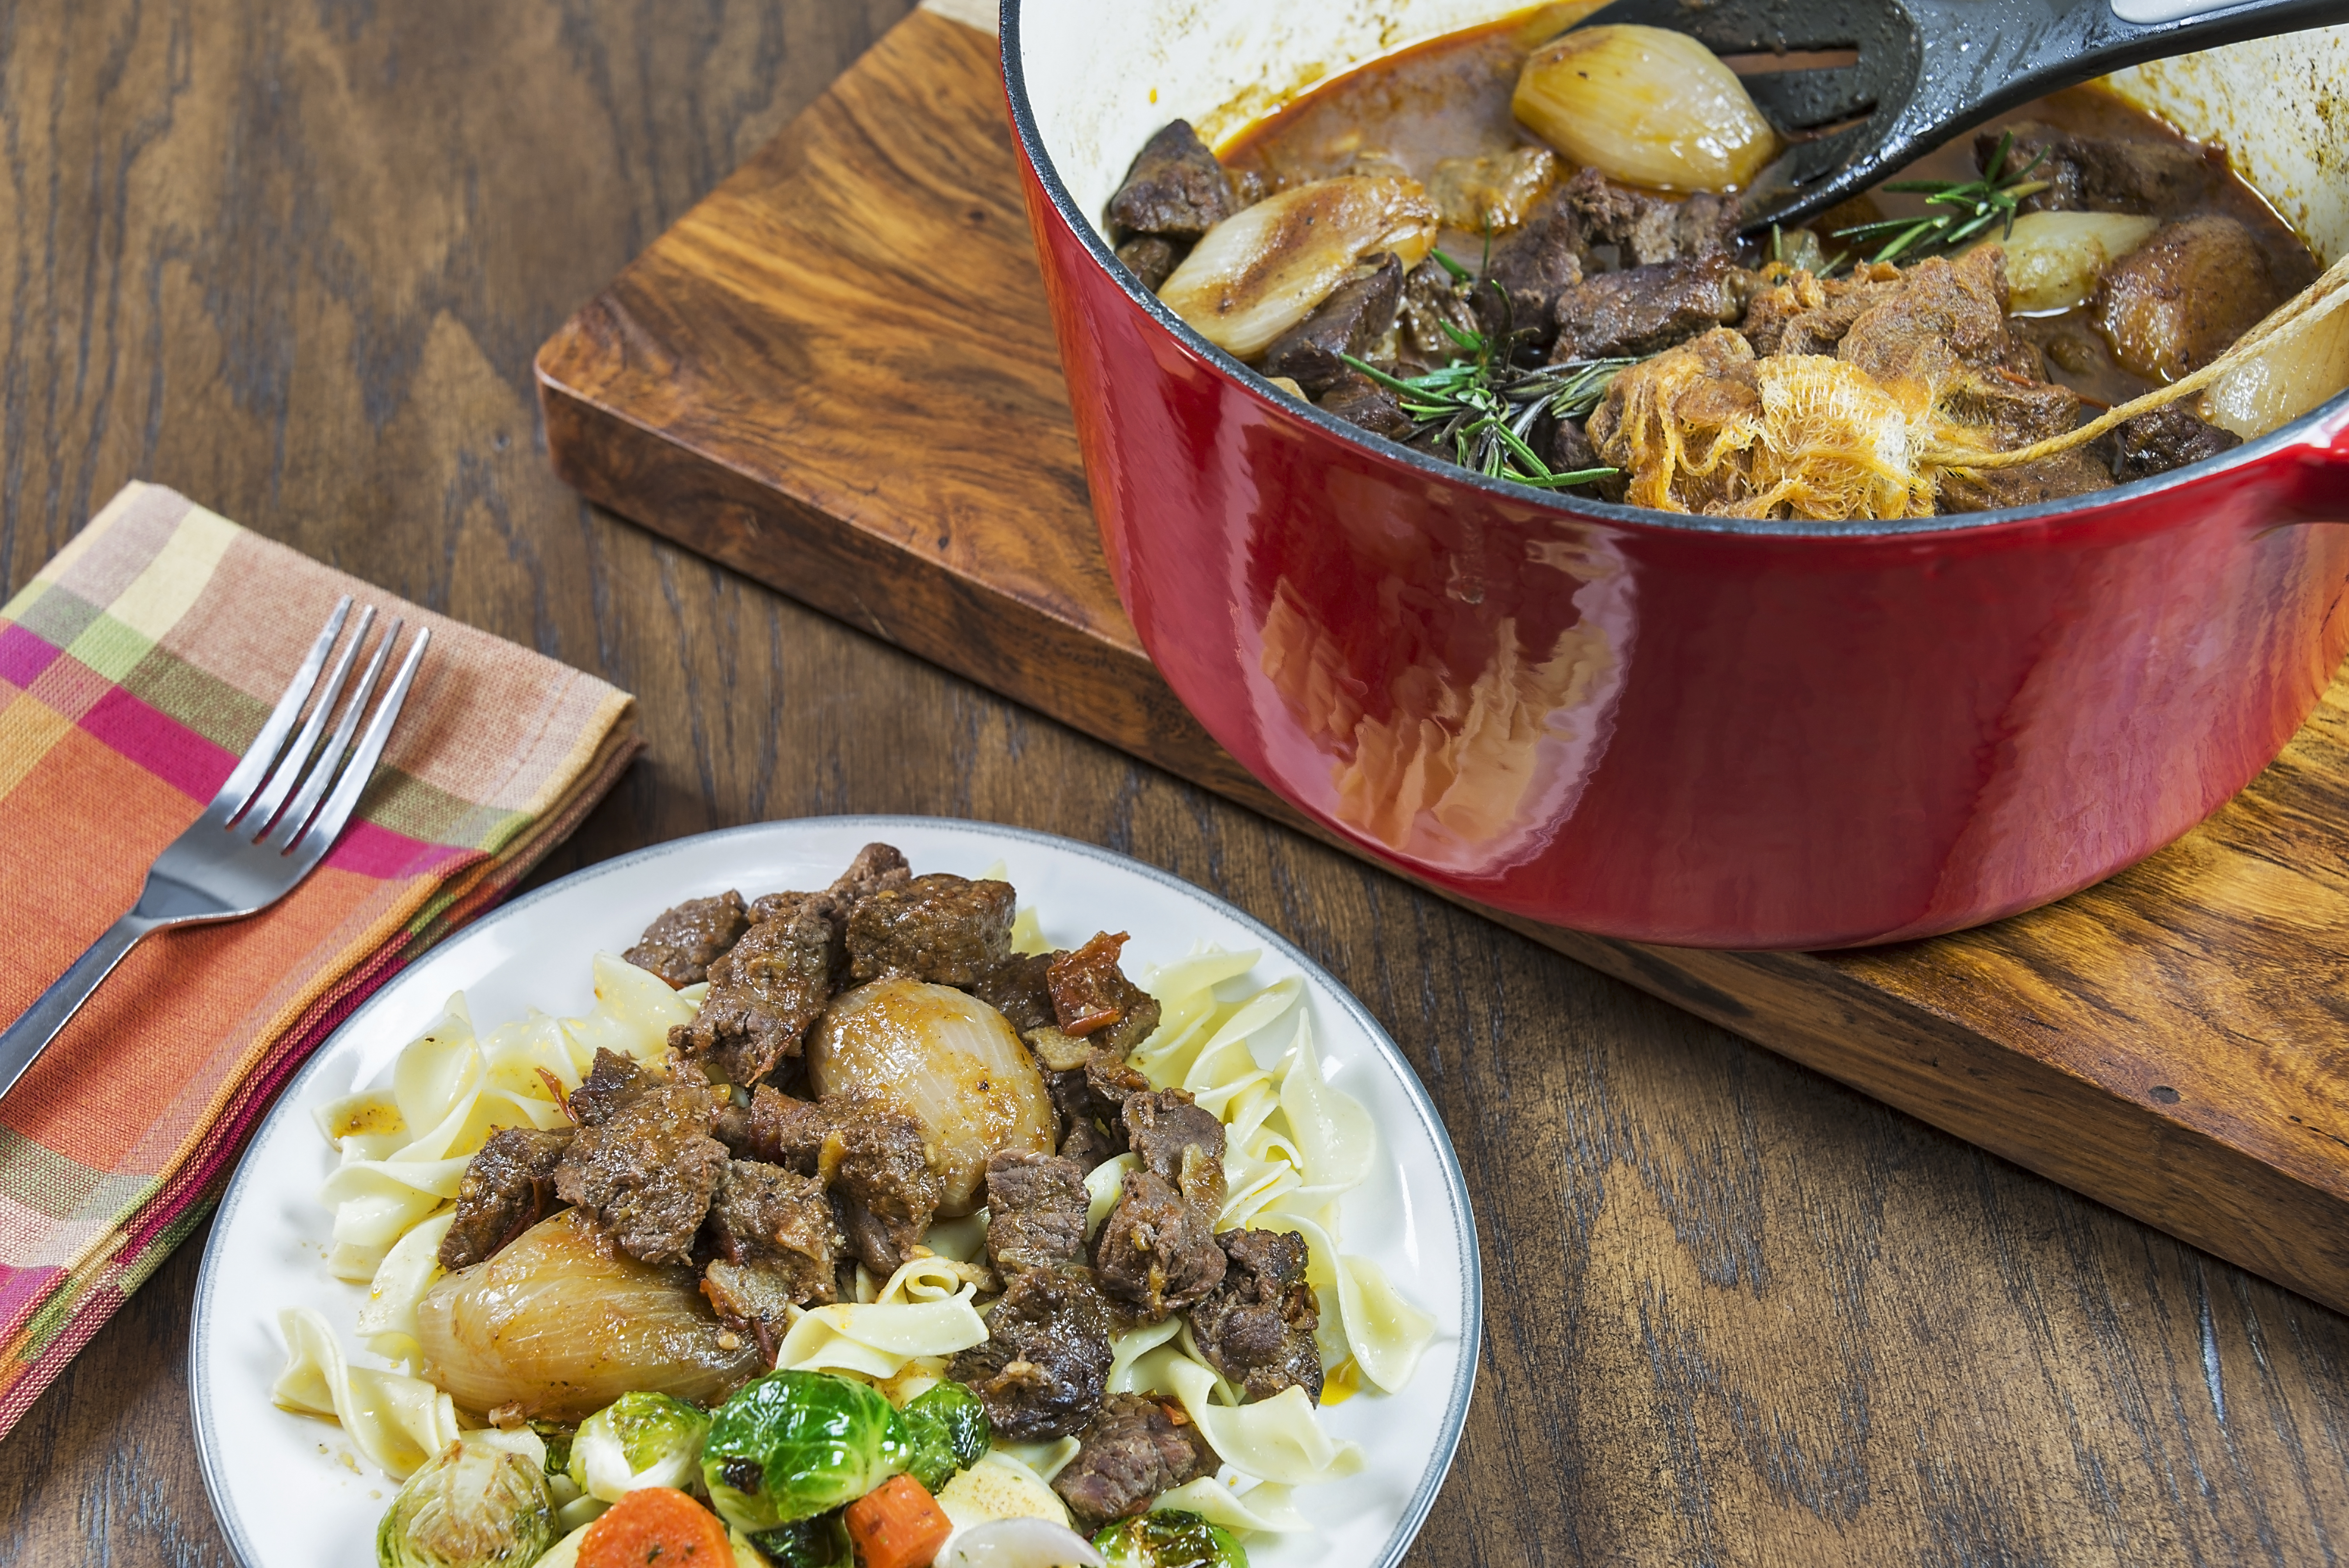 Red pot with vegetables and meat next to a plate with noodles topped with the meat and vegetables.